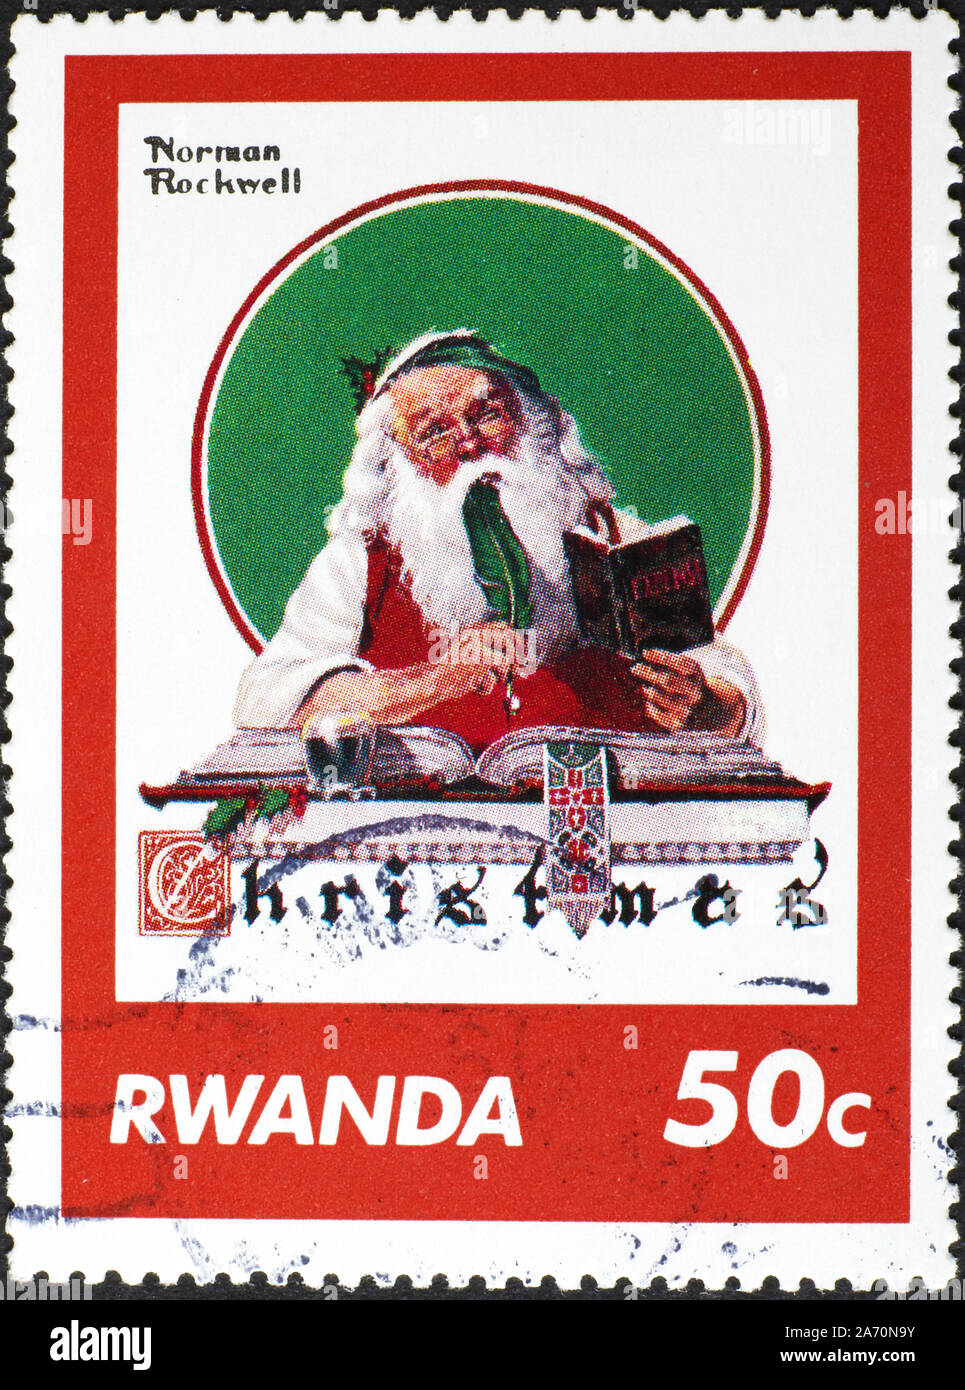 Portrait of Santa Claus by Norman Rockwell on postage stamp Stock Photo